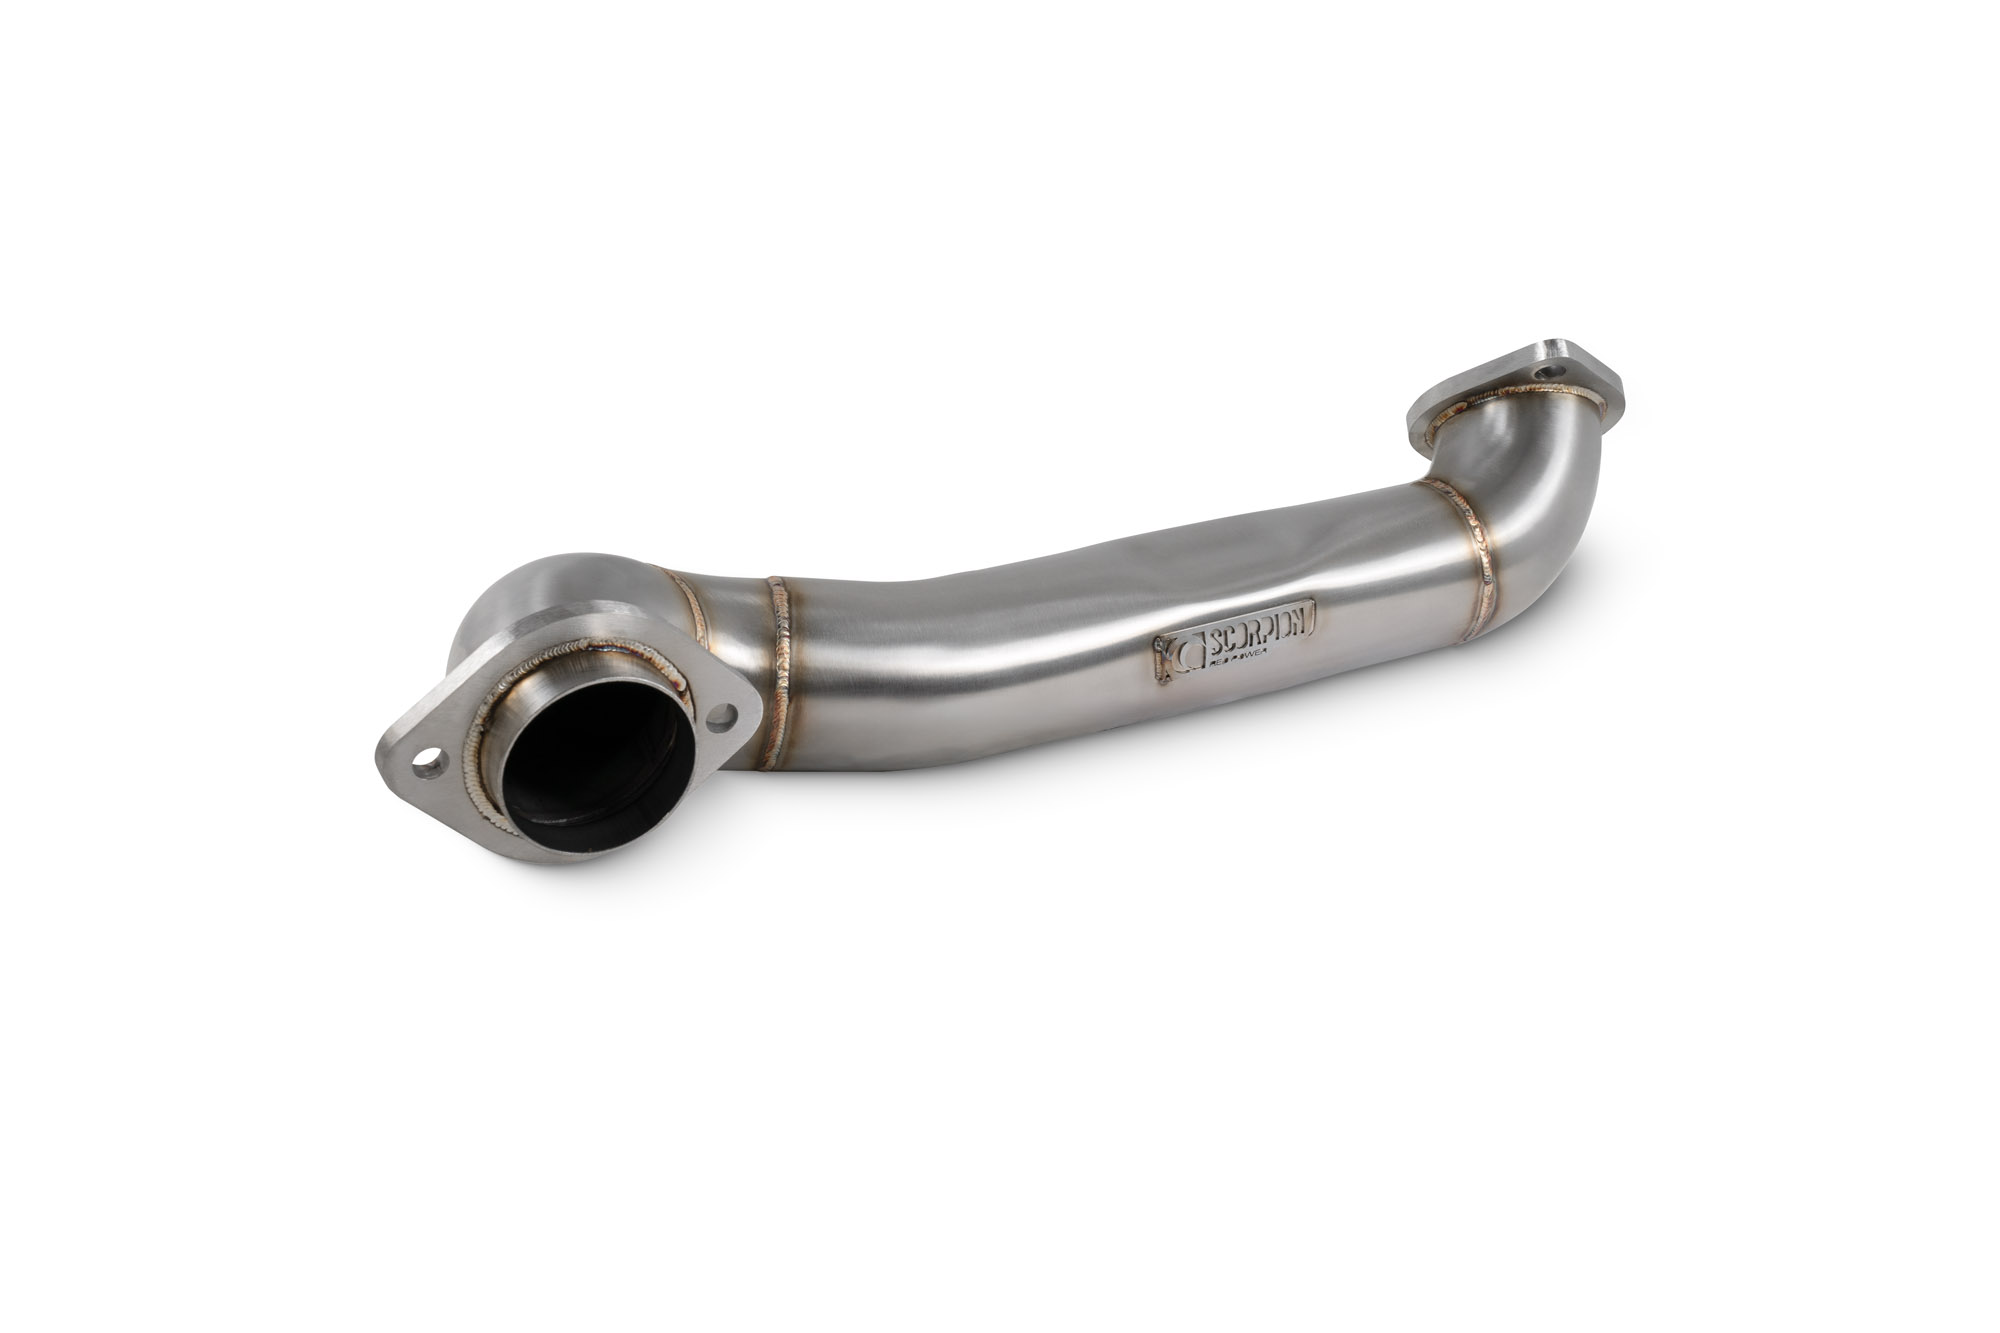 Scorpion Exhausts Front Crossover Pipe for G8X M3/M4.